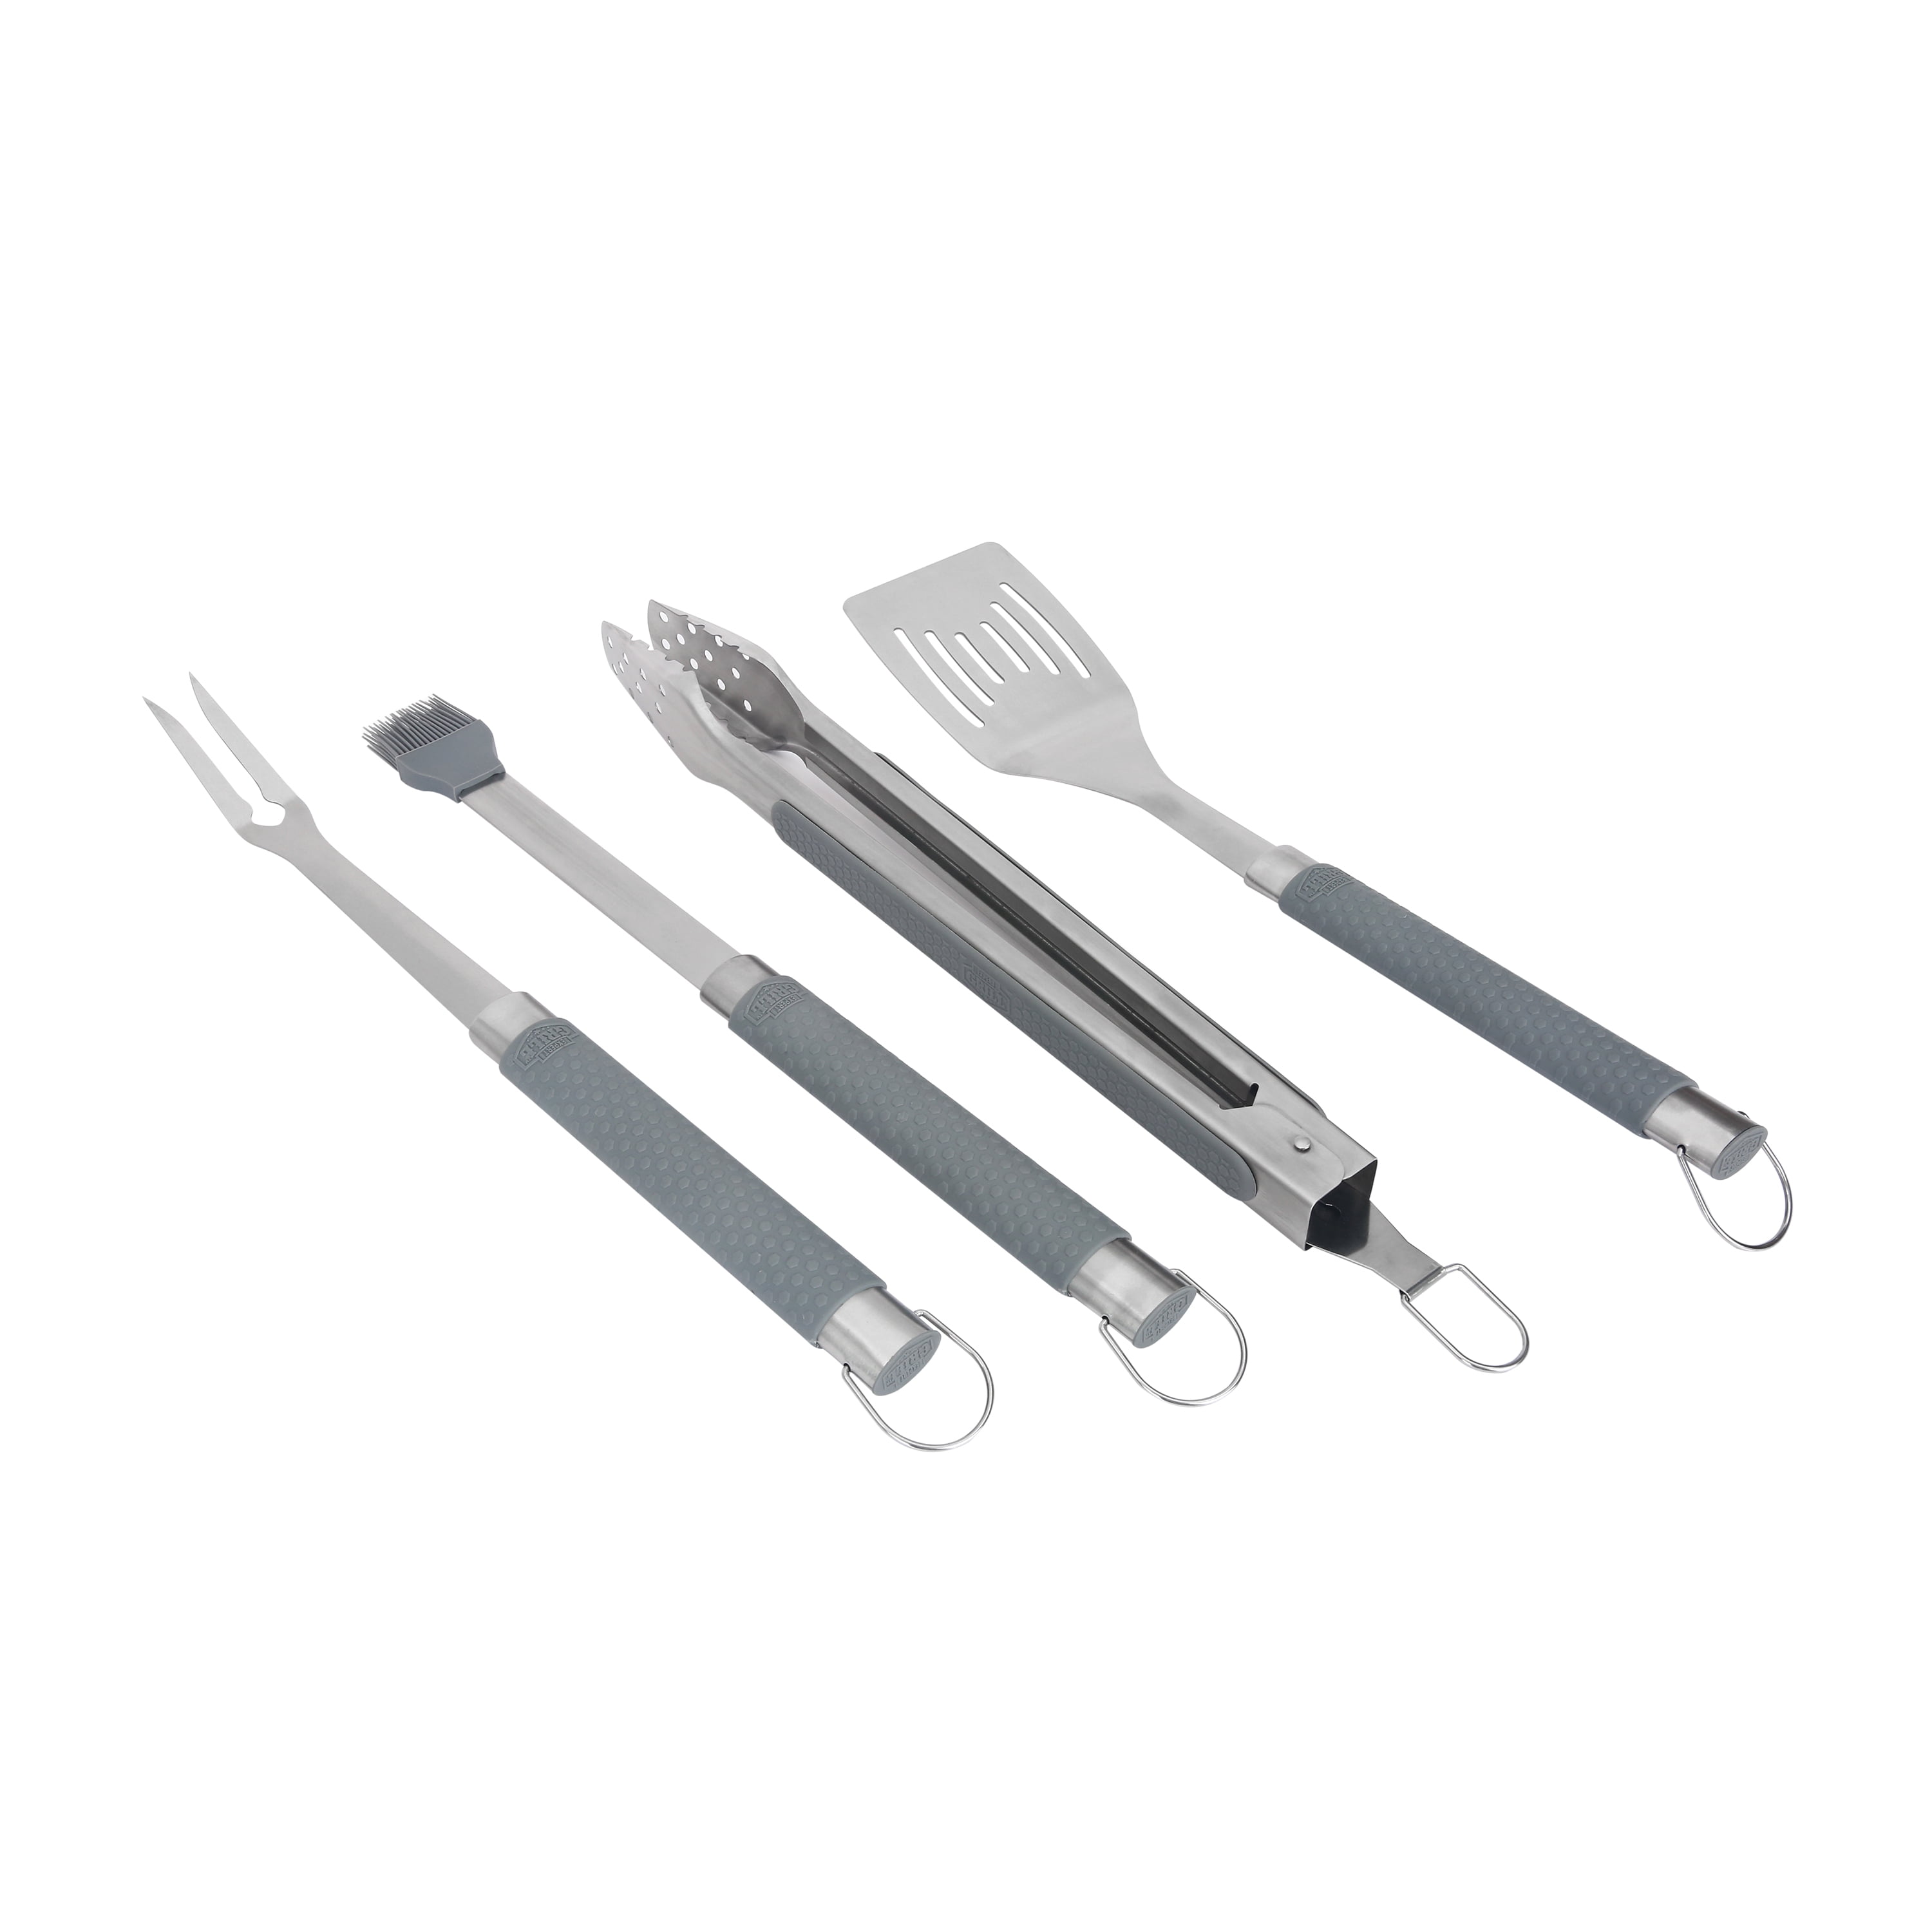 5 Piece BBQ Tool Set Stainless Steel Heavy Duty Barbeque Grill Accessories Kit 